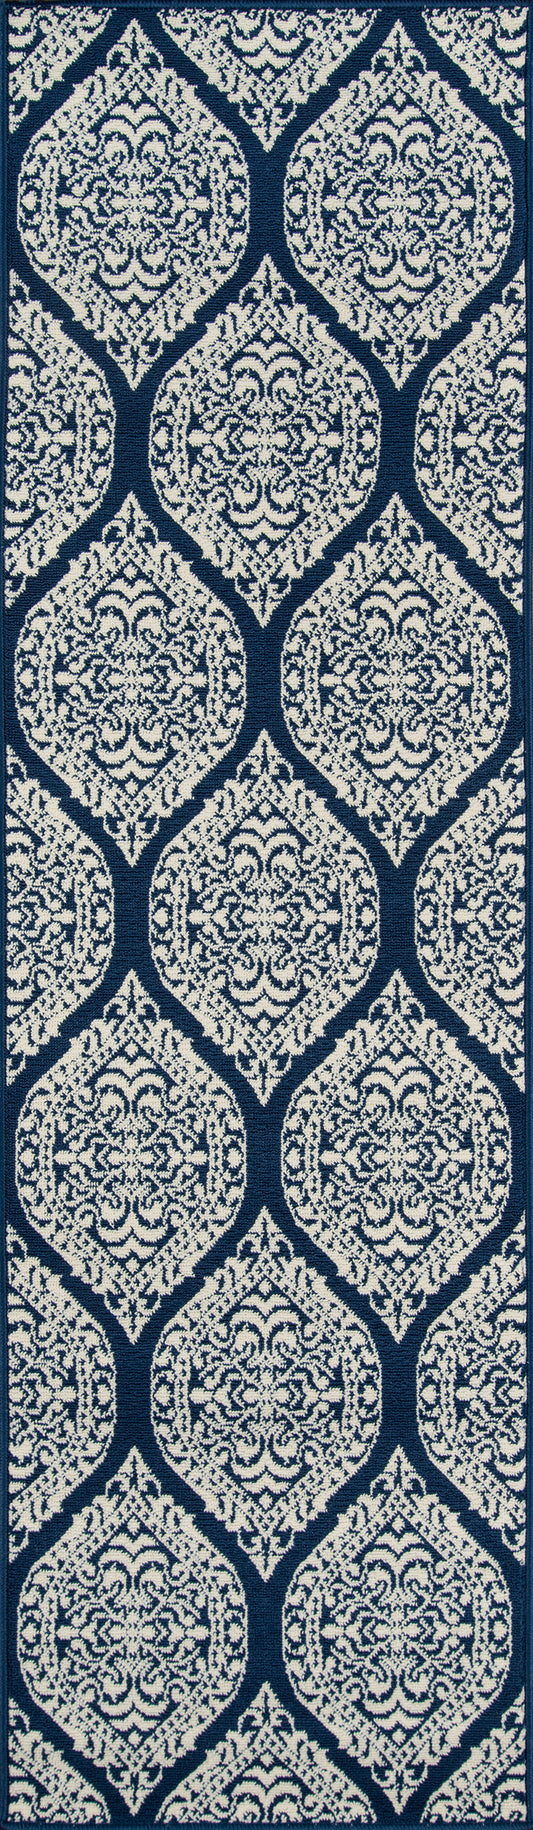 Baja Damask Synthetic Blend Indoor/Outdoor Area Rug by Momeni Rugs